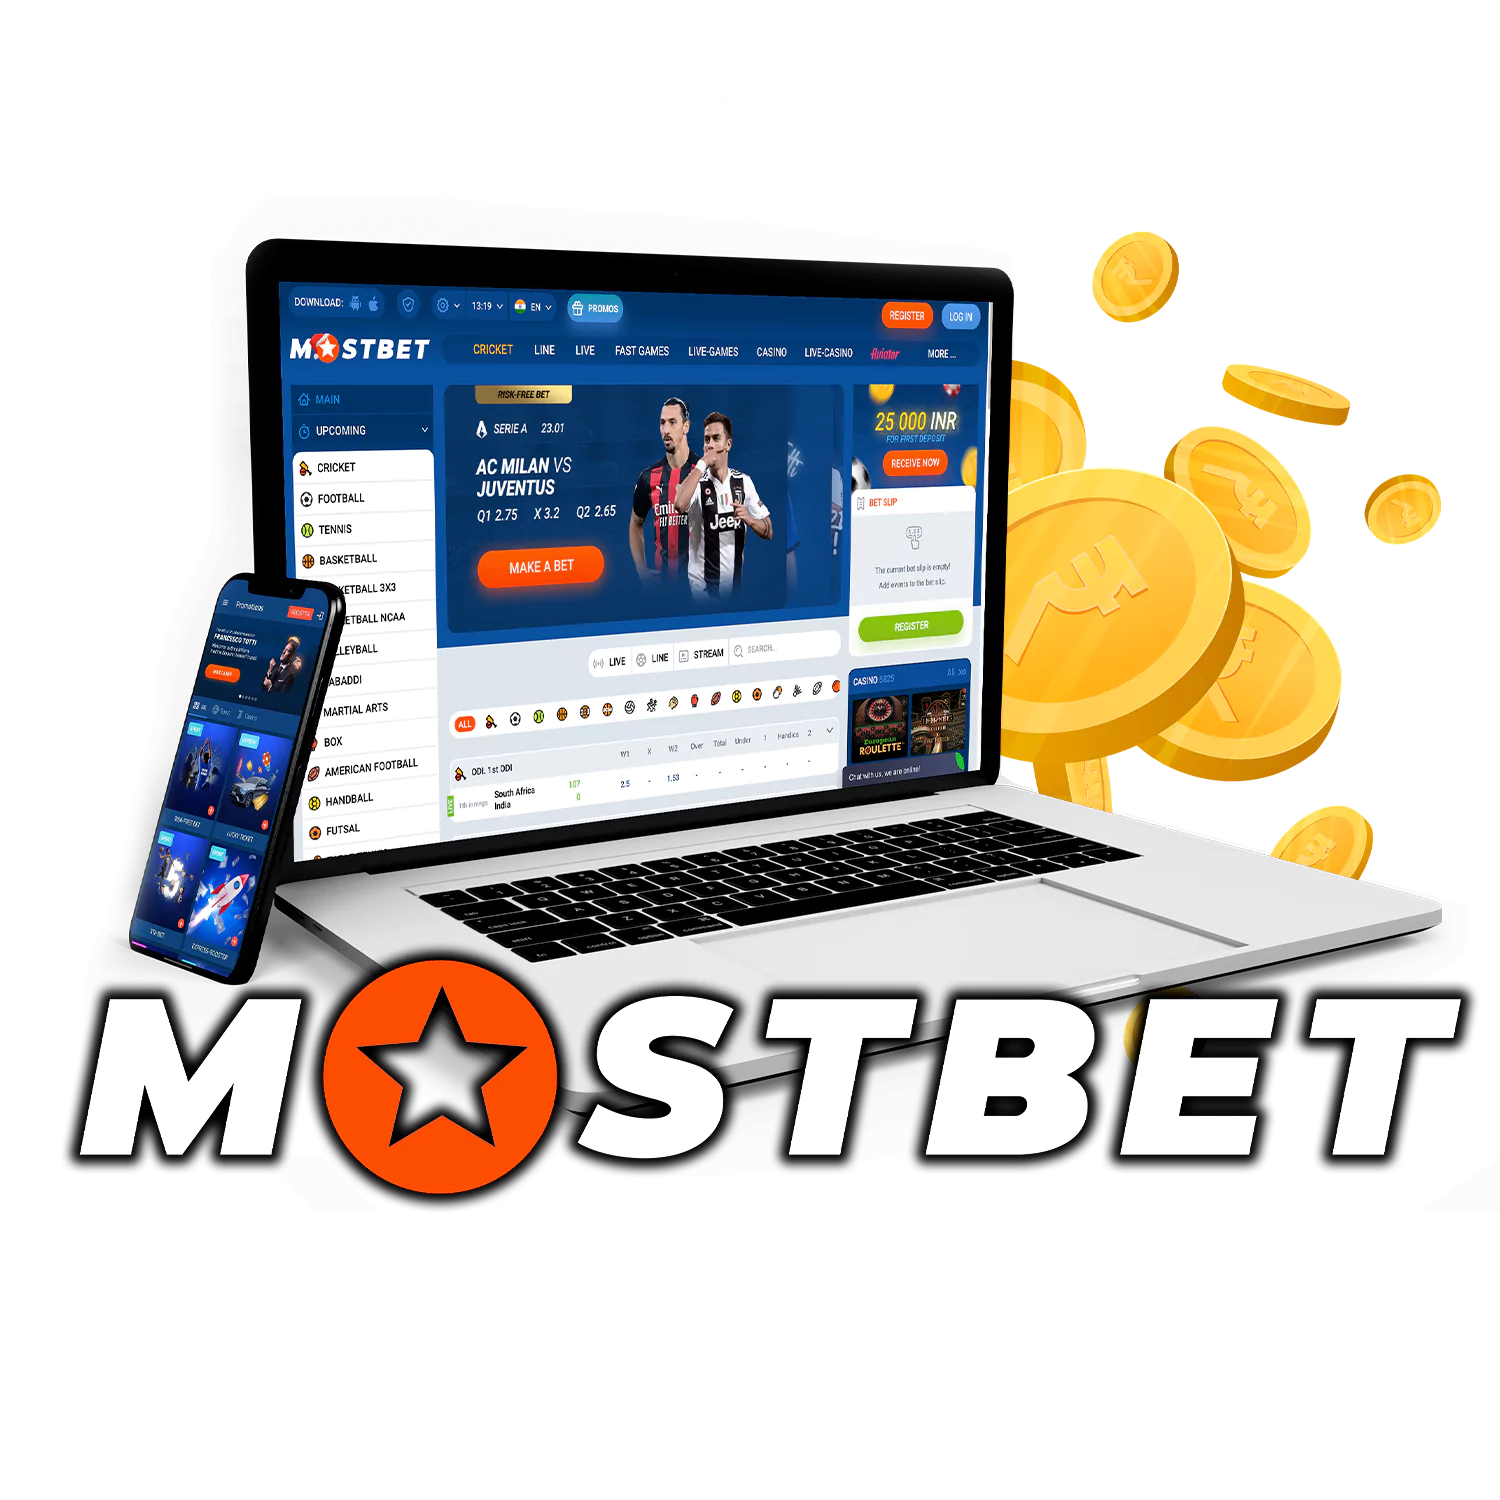 Why Mostbet app for Android and iOS in Tunisia Is No Friend To Small Business